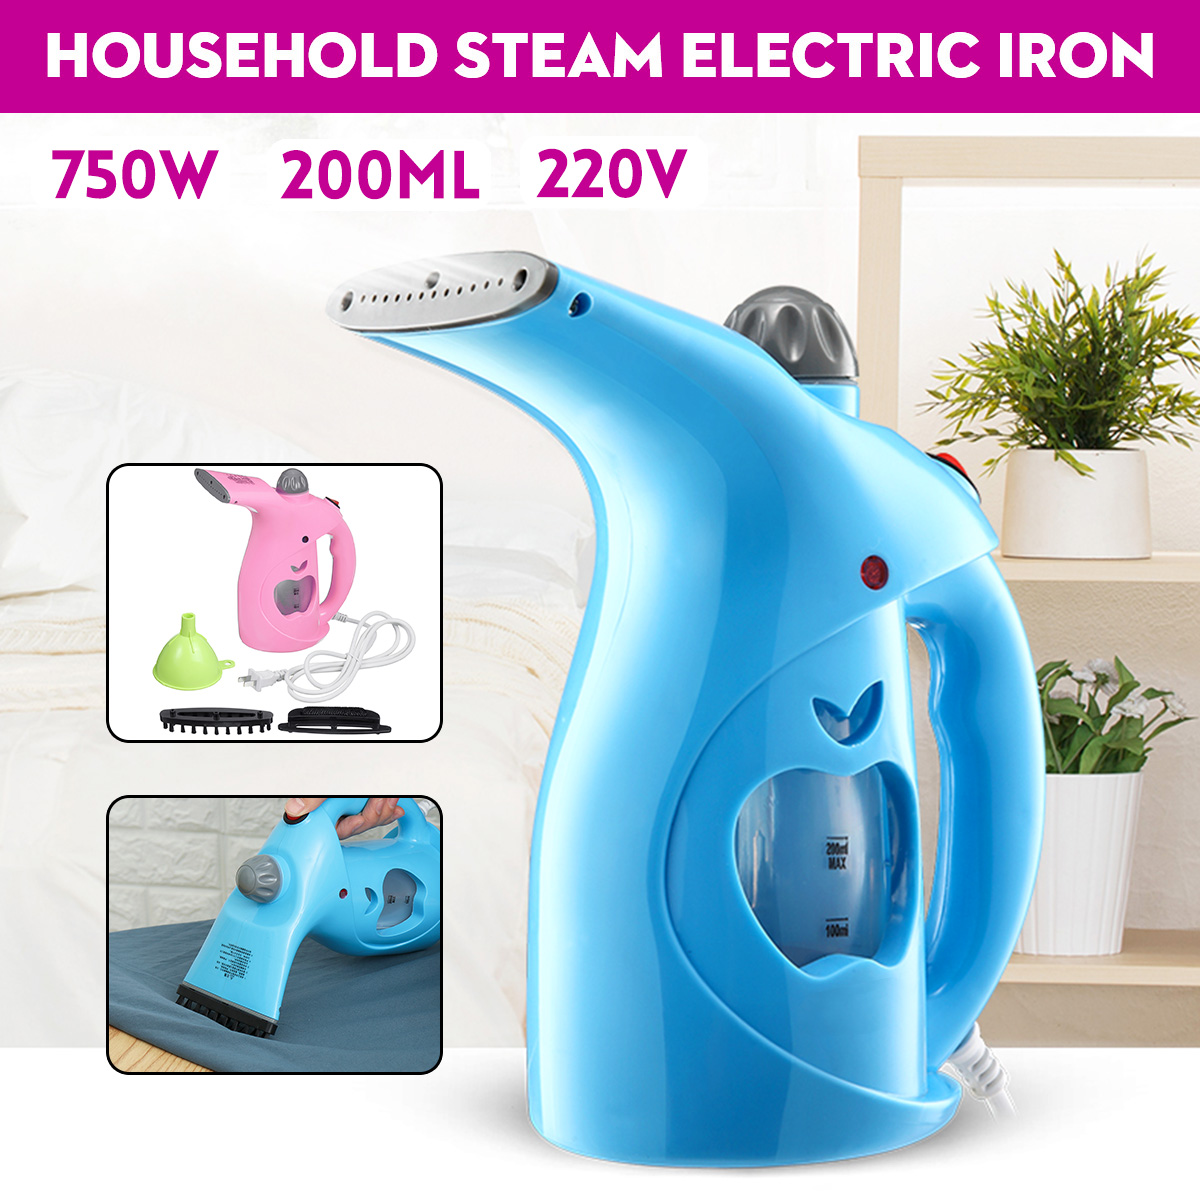 220V-3-in-1-Portable-Electric-Steam-Iron-Handheld-Clothes-Steamer-Brush-200ML-1626106-1